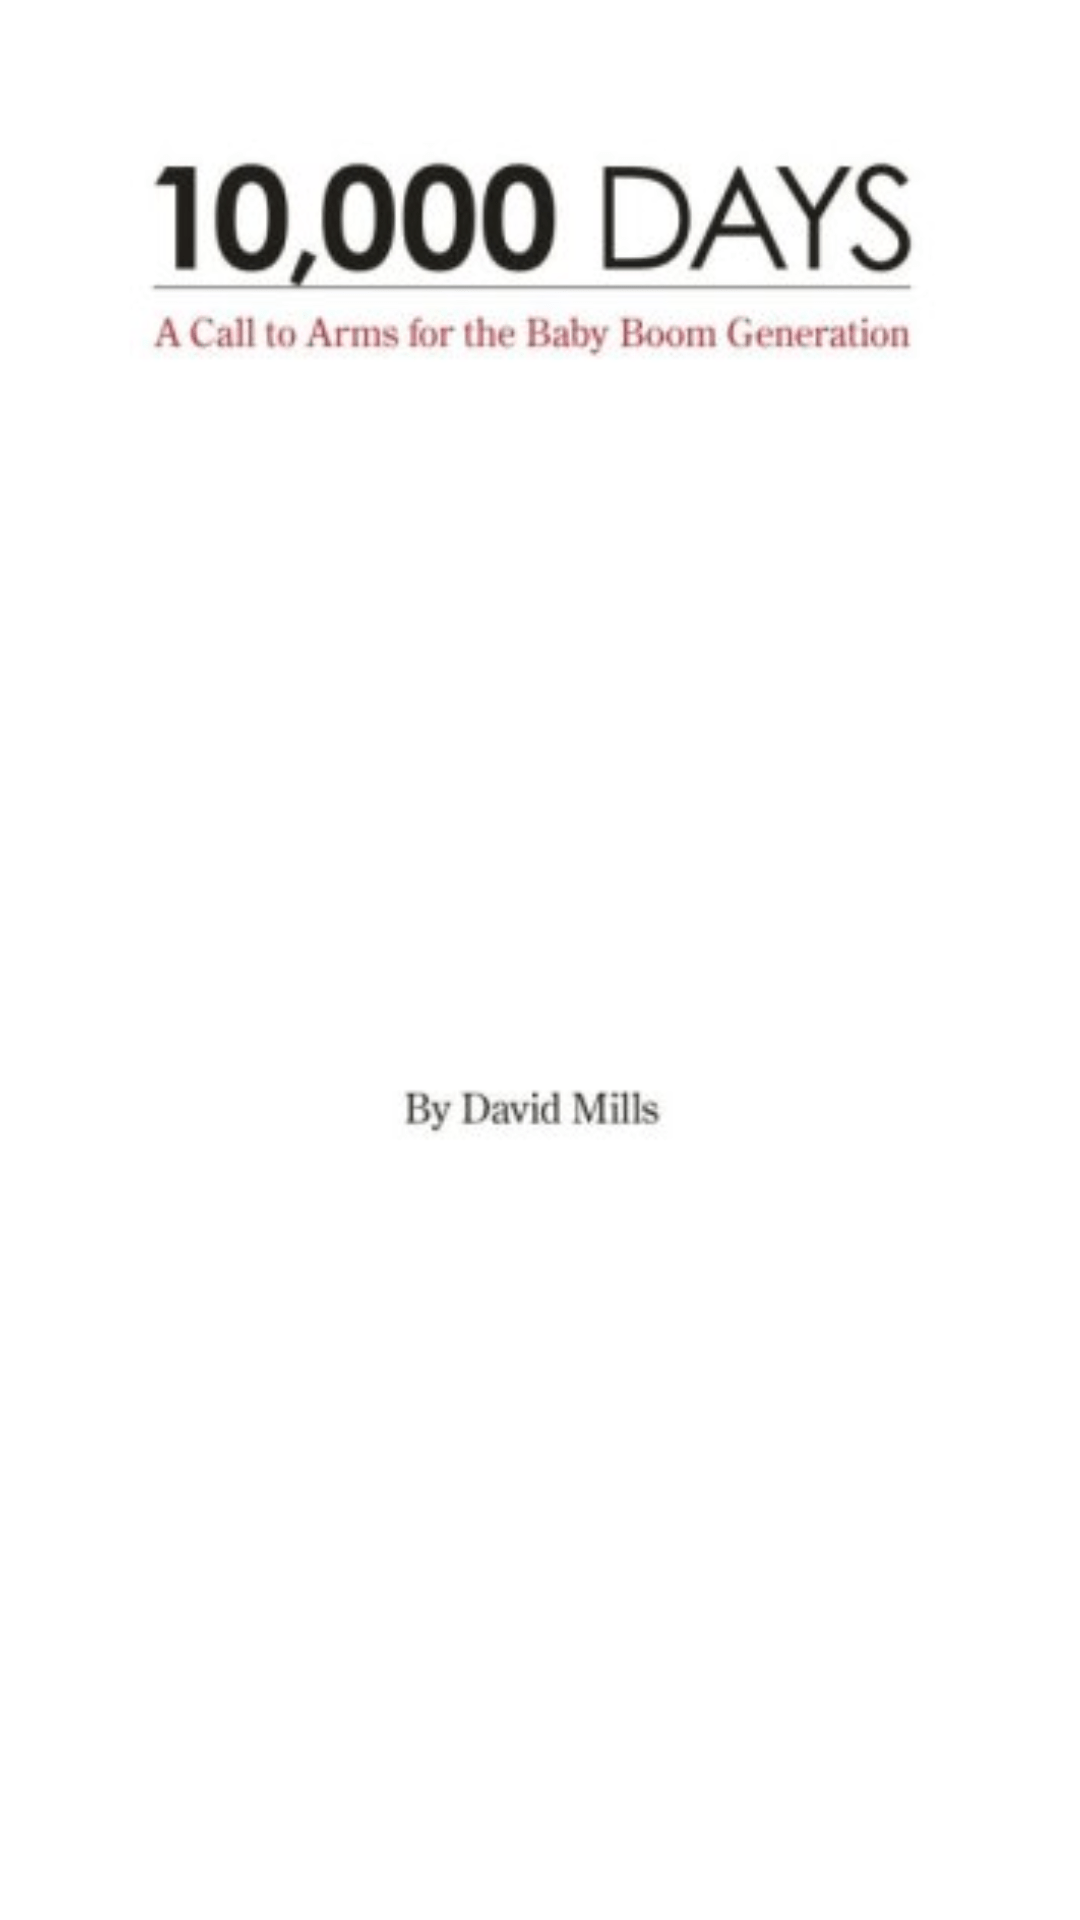 Books　10,000　For　Arms　kenya　by　Mills　Days:　To　A　Generation　Baby　Call　The　|Attic　Boom　David